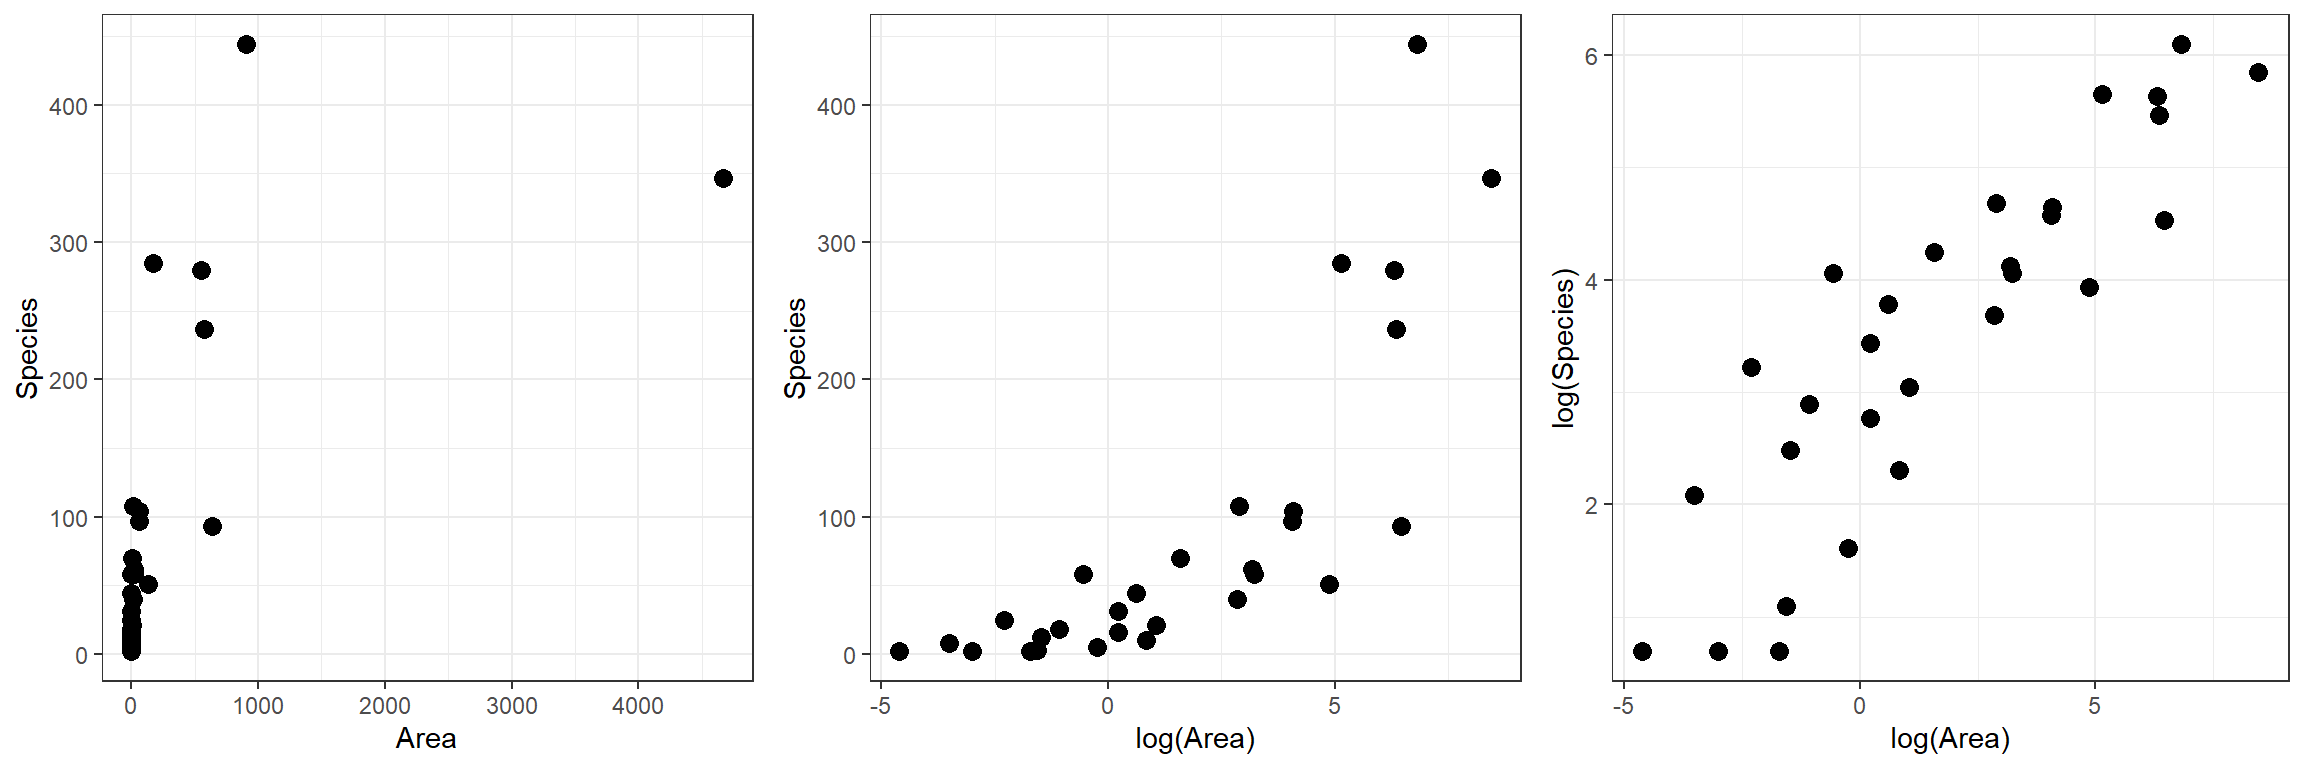 Plant species richness versus area for 29 islands in the Galapagos Islands archipelago. Data are from (M. P. Johnson & Raven, 1973).